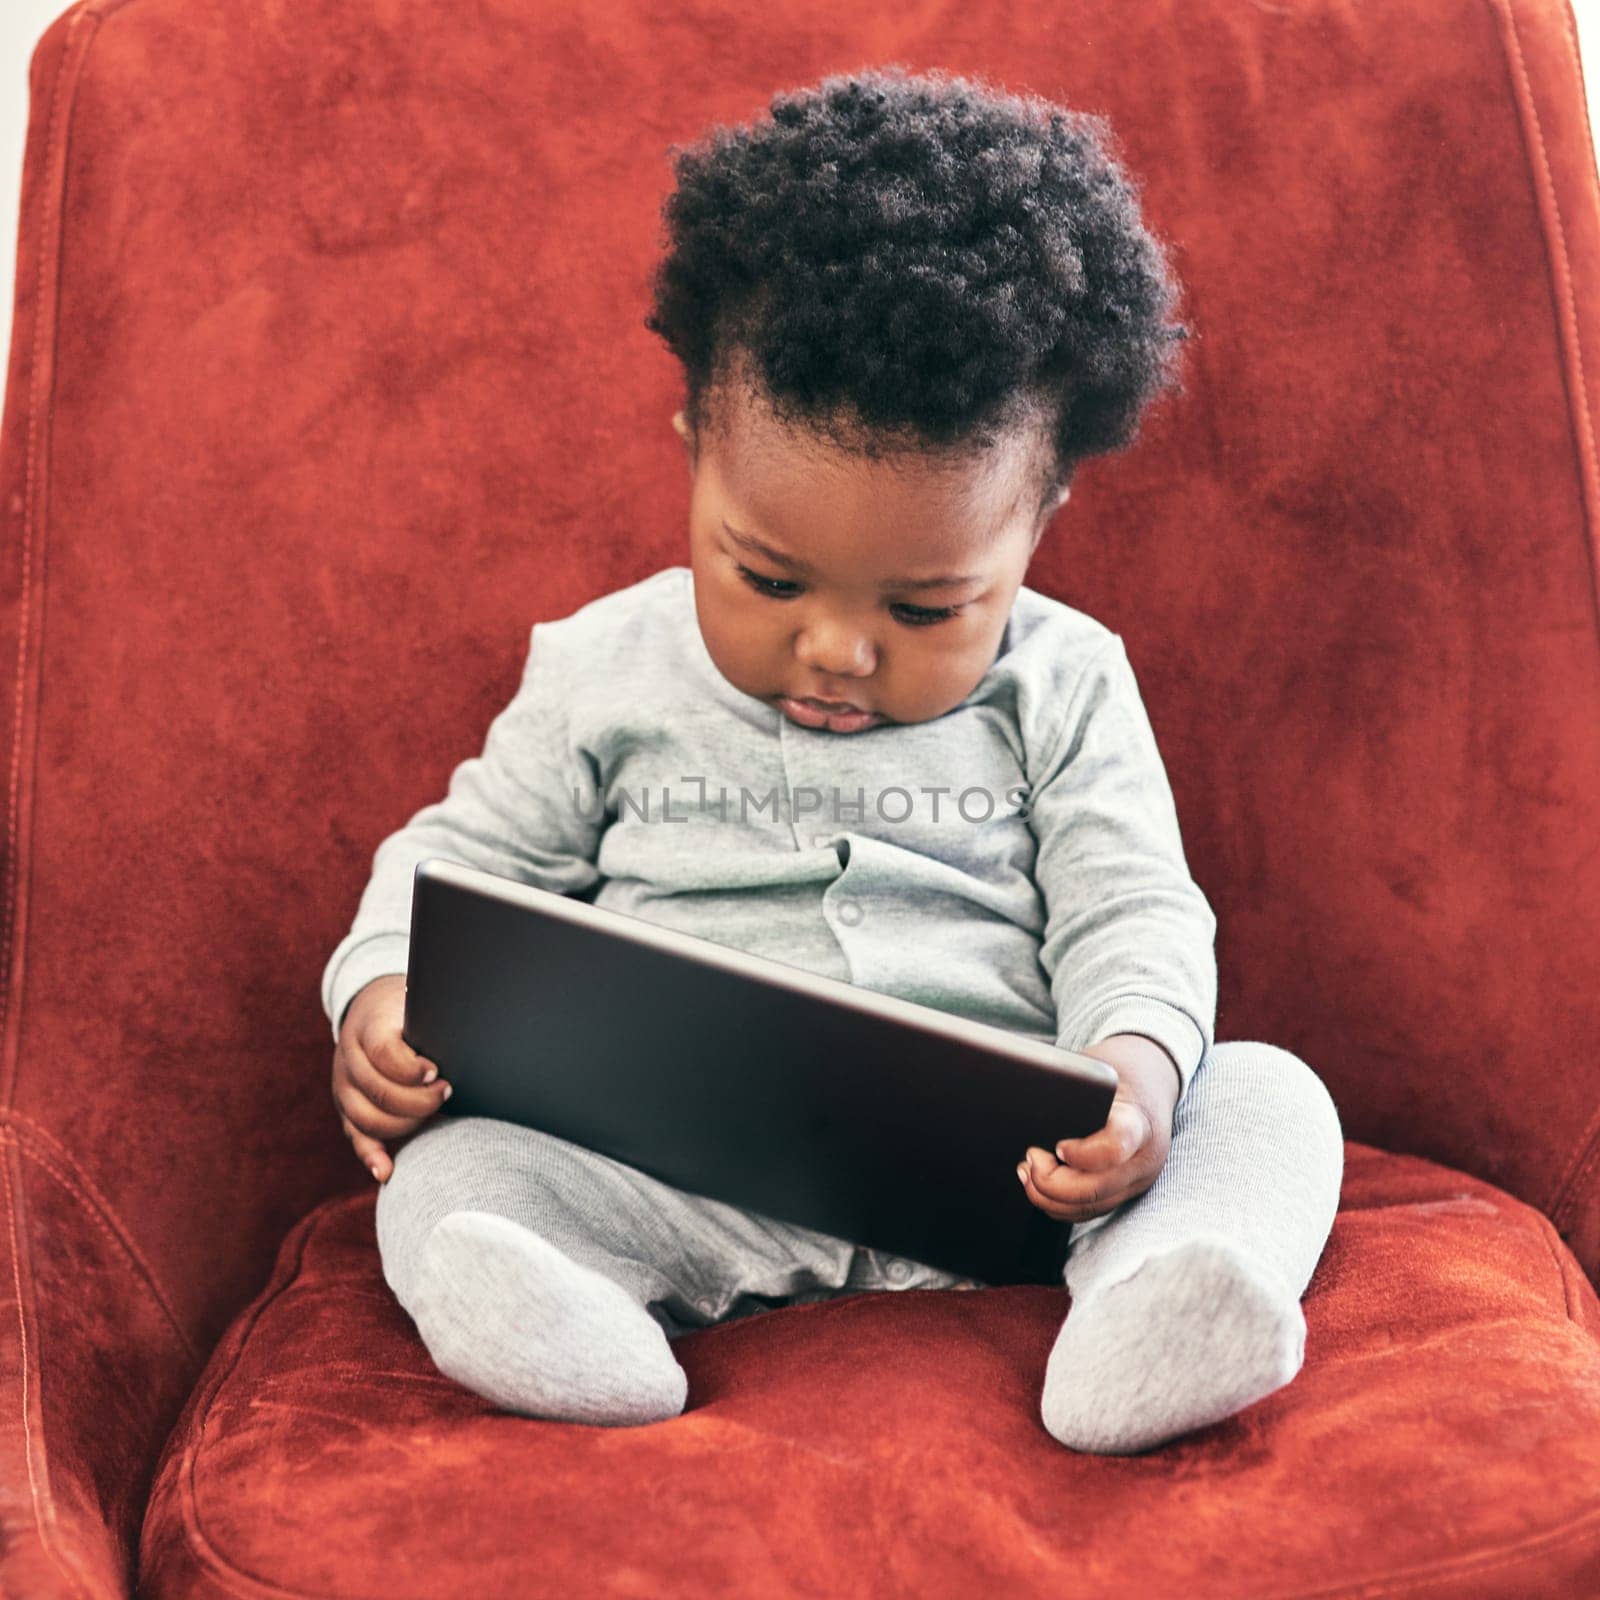 Shot of a little baby boy sitting in a chair holding a digital tablet.